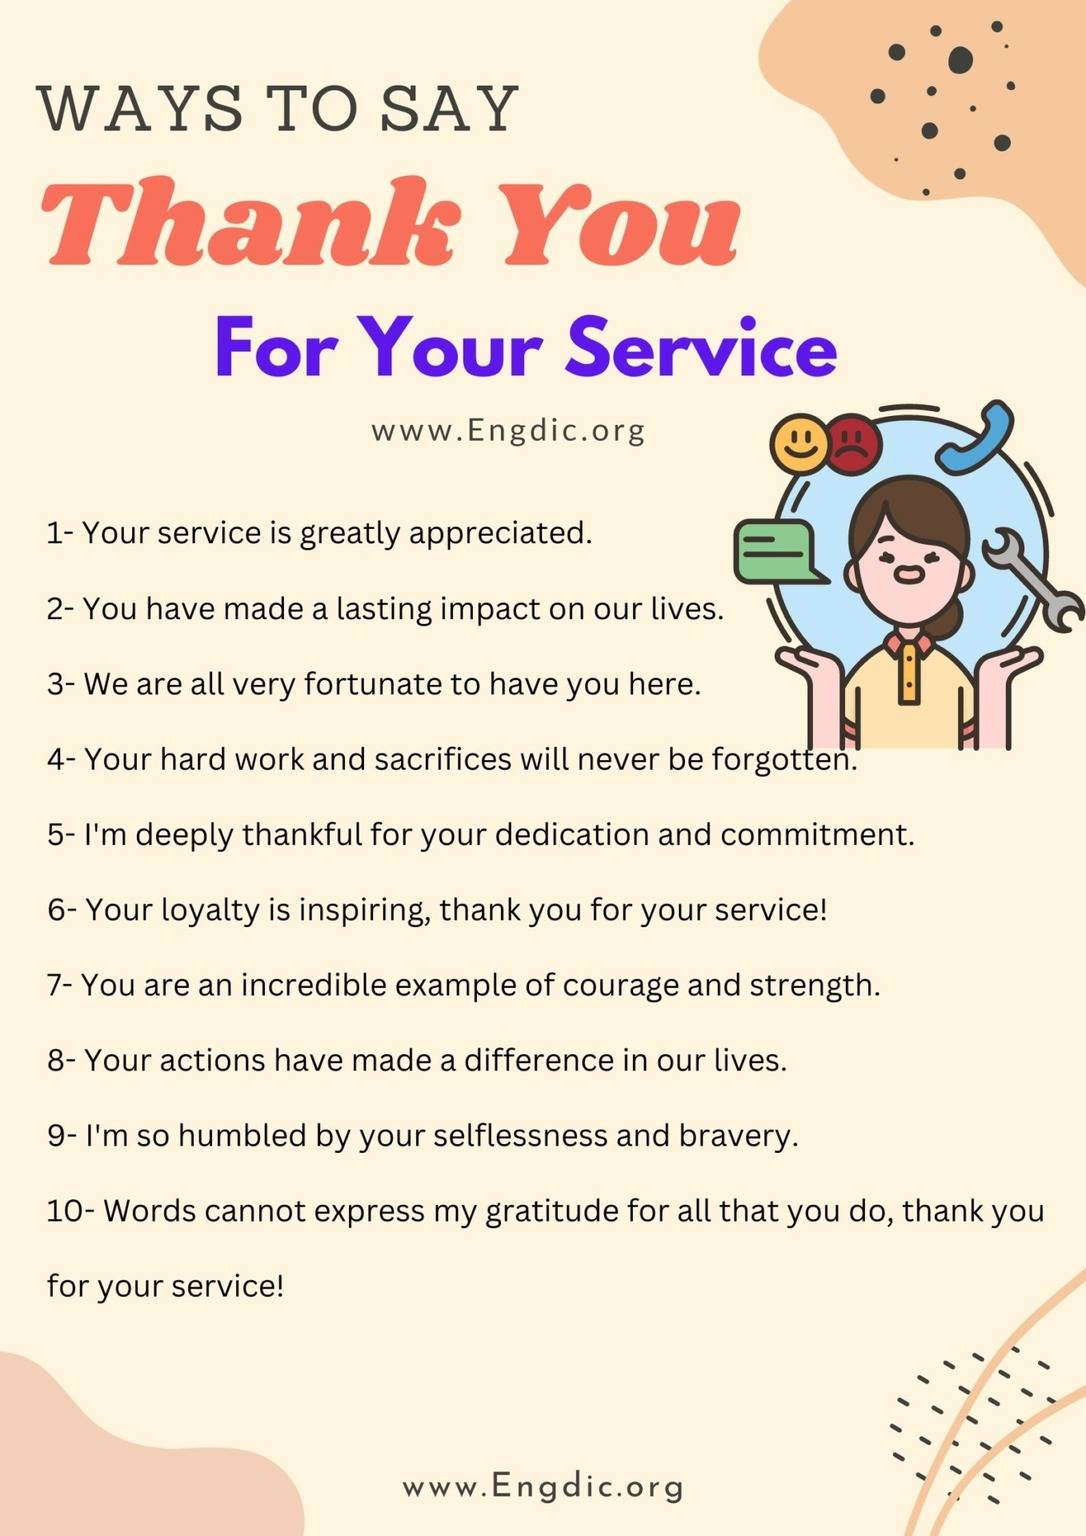 100+ Ways To Say THANK YOU - EngDic